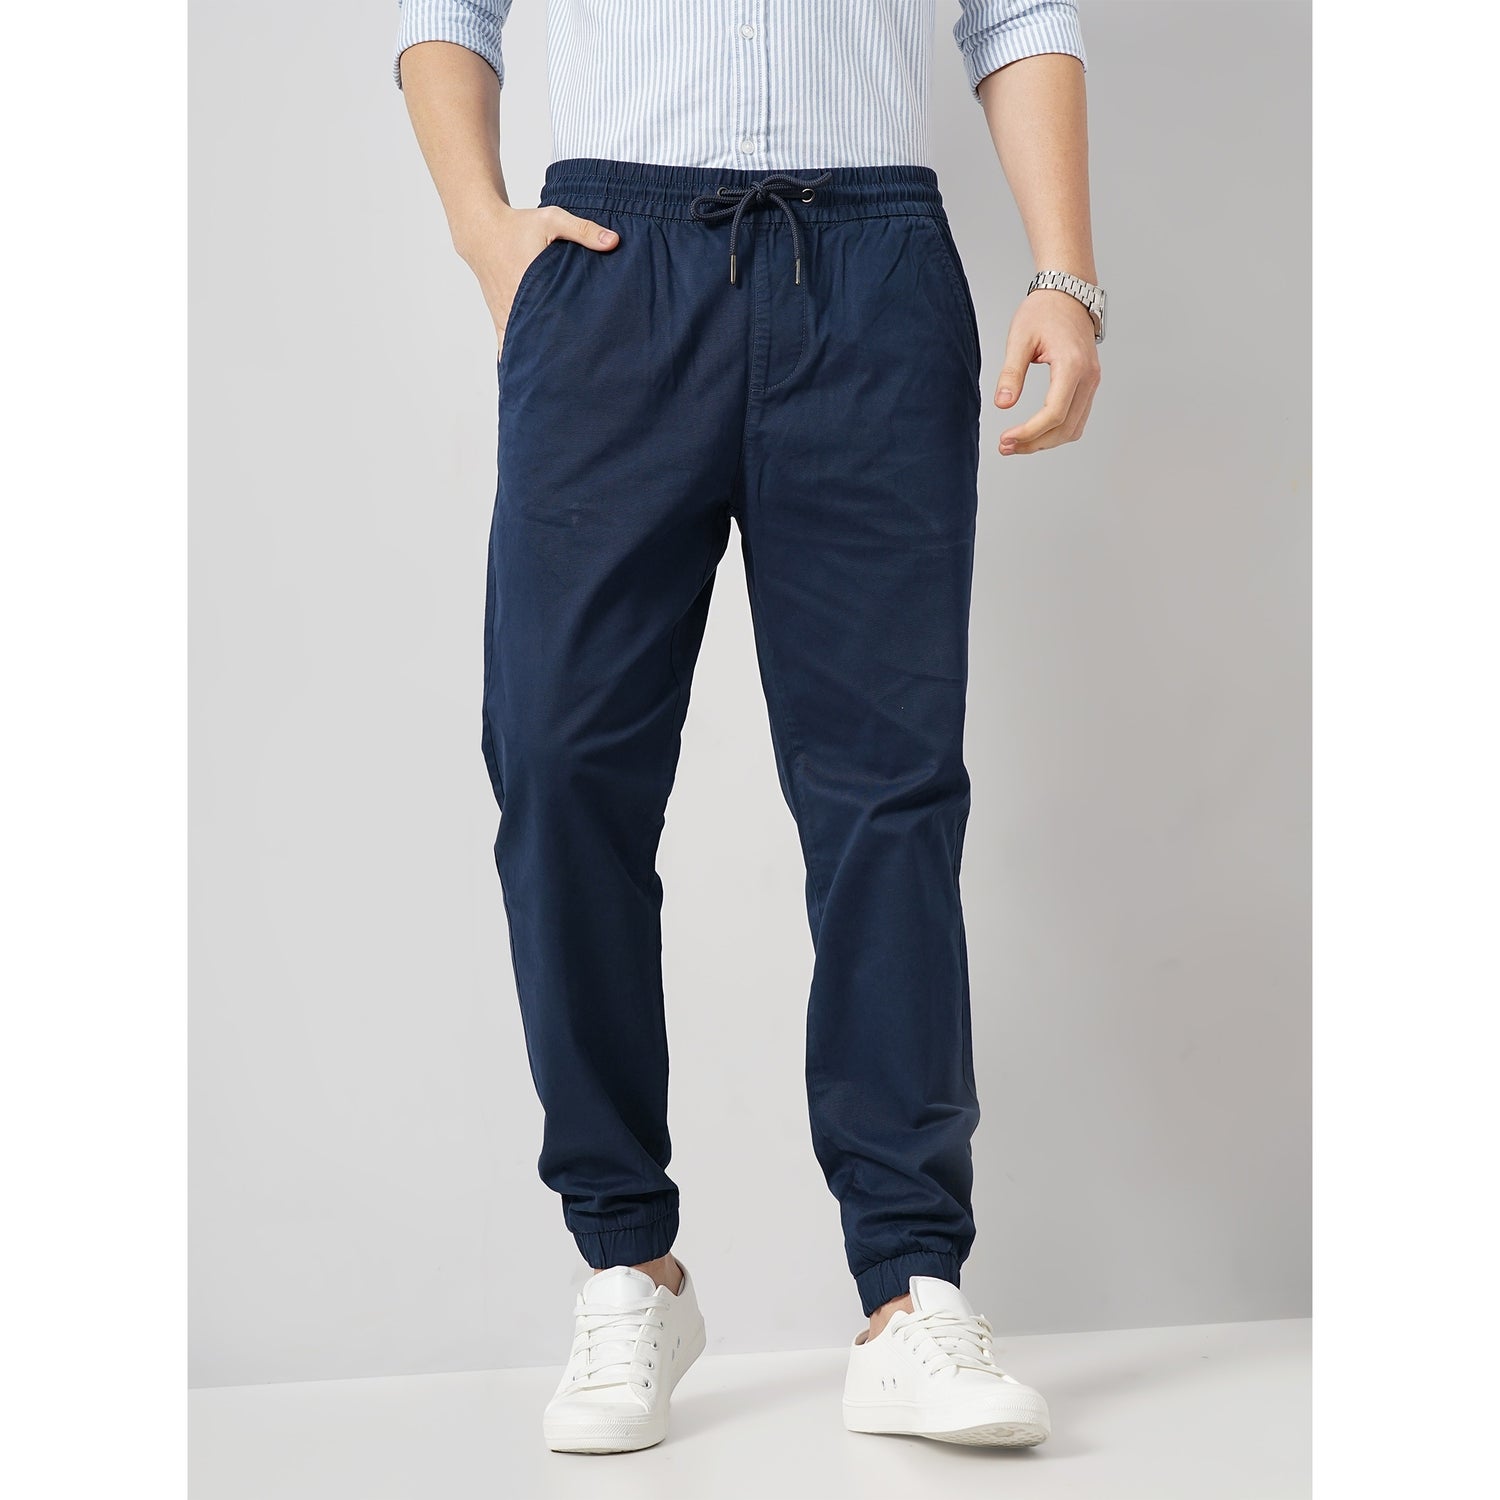 Men Blue Solid Loose Fit Cotton Chinos Casual Trousers (FOPLANE1)